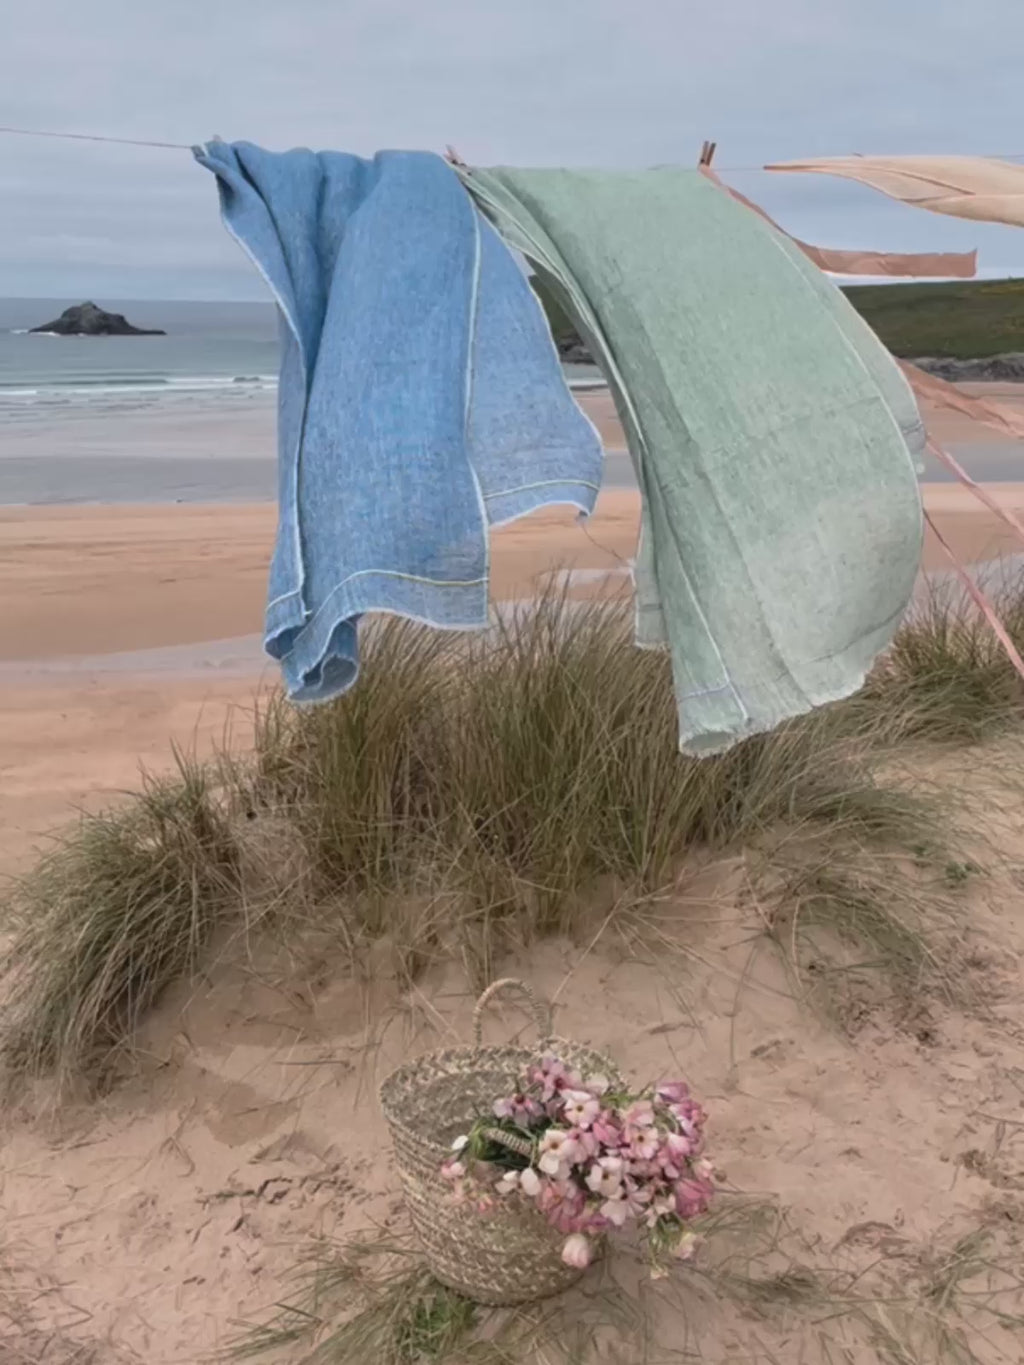 Video of linen scarves hanging on a washing line by the sea